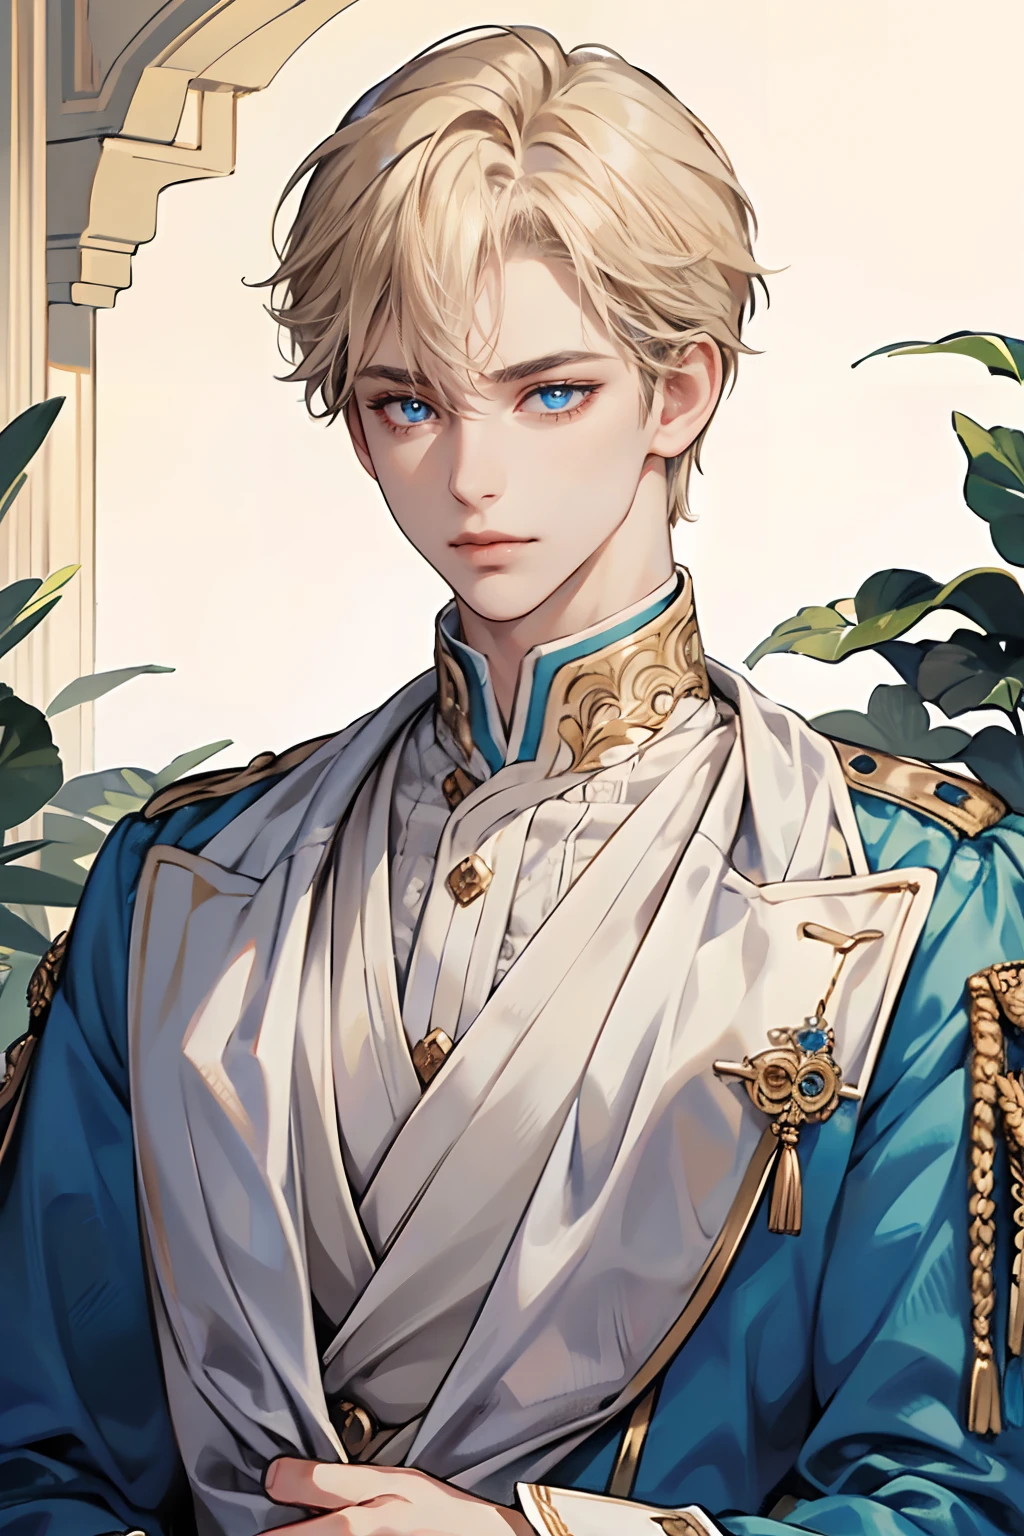 (tmasterpiece, high resolution, ultra - detailed:1.0), (1boy, adult male), Perfect male body,Eyes look at the camera, (prince:1.3), Delicate eyes and delicate face, Extremely detailed CG, Unity 8k wallpaper, Complicated details, solo person, Detailed face, (White royal costume, with short golden hair, Blue eyes, Sad expression),palace, color difference, Depth of field, dramatic shadow, Ray tracing, Best quality, Portrait